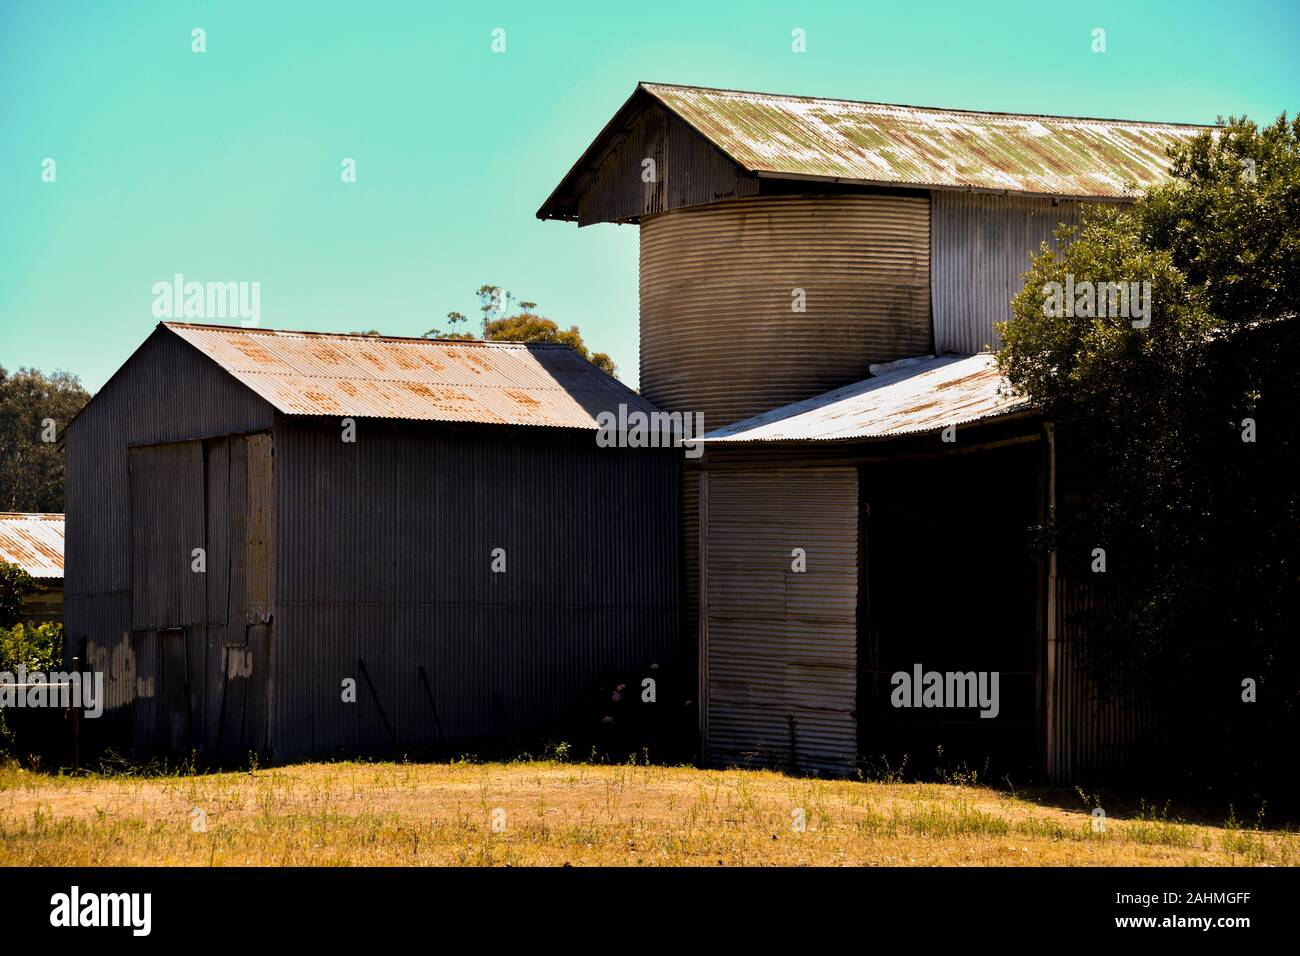 Old Rusted Corrugated Iron Barn Sheds with Silo on Farm Stock Photo